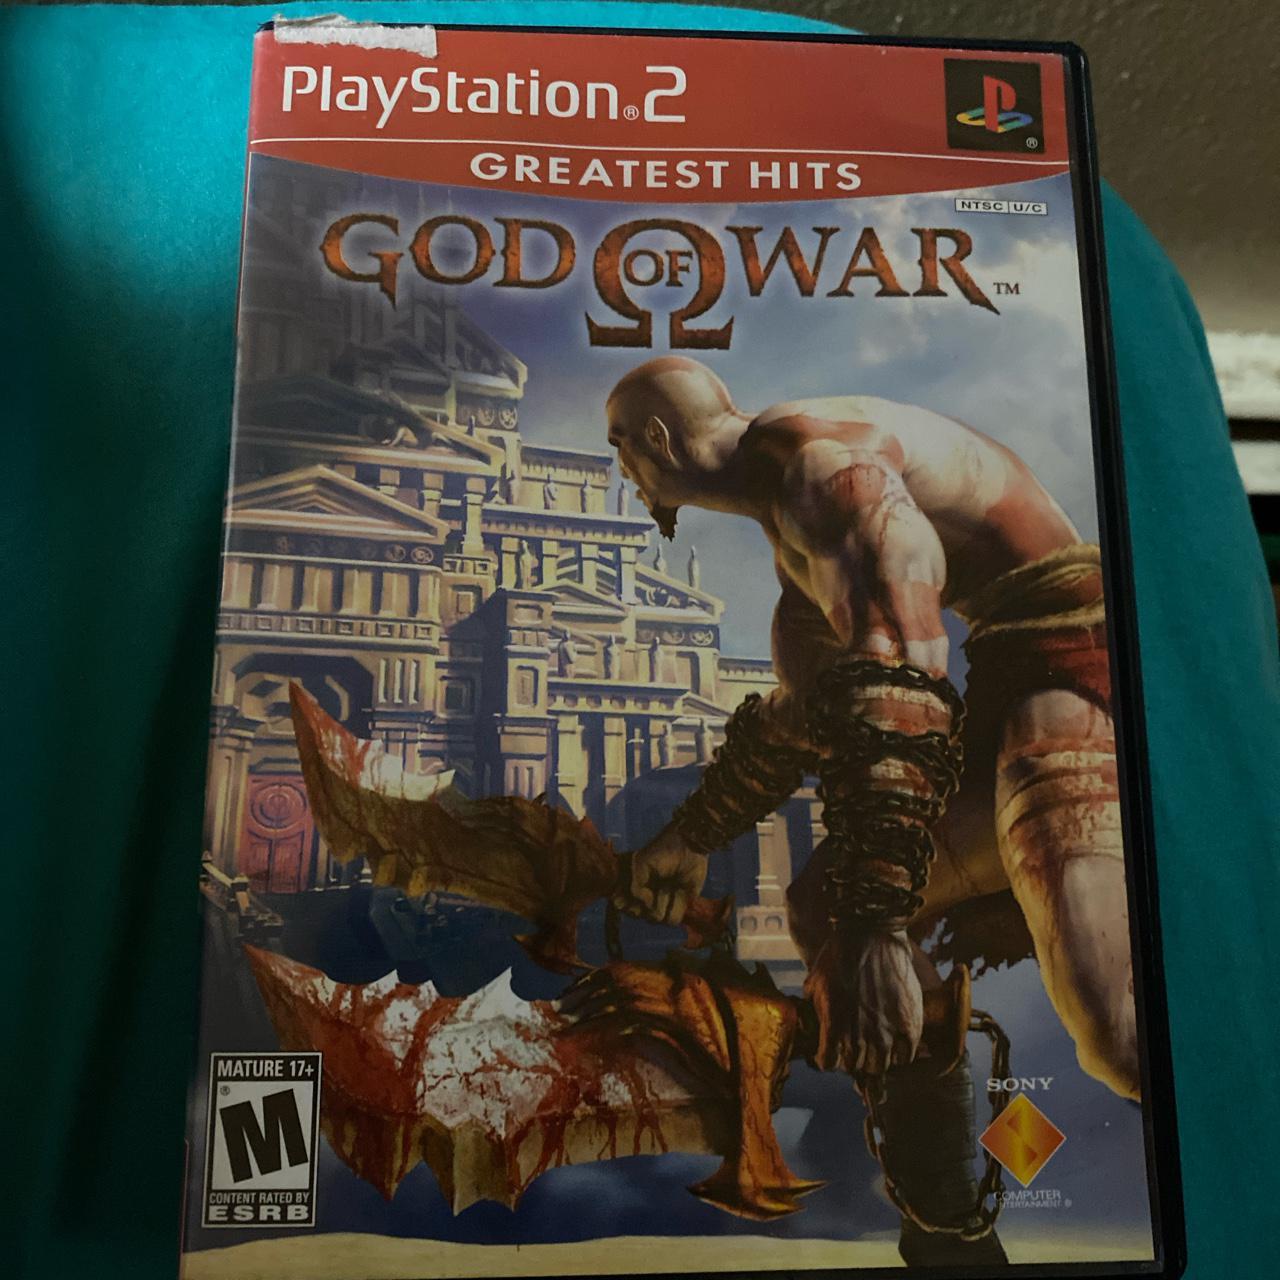 Product Image 1 - GOD OF WAR (PS2)

Greatest hits